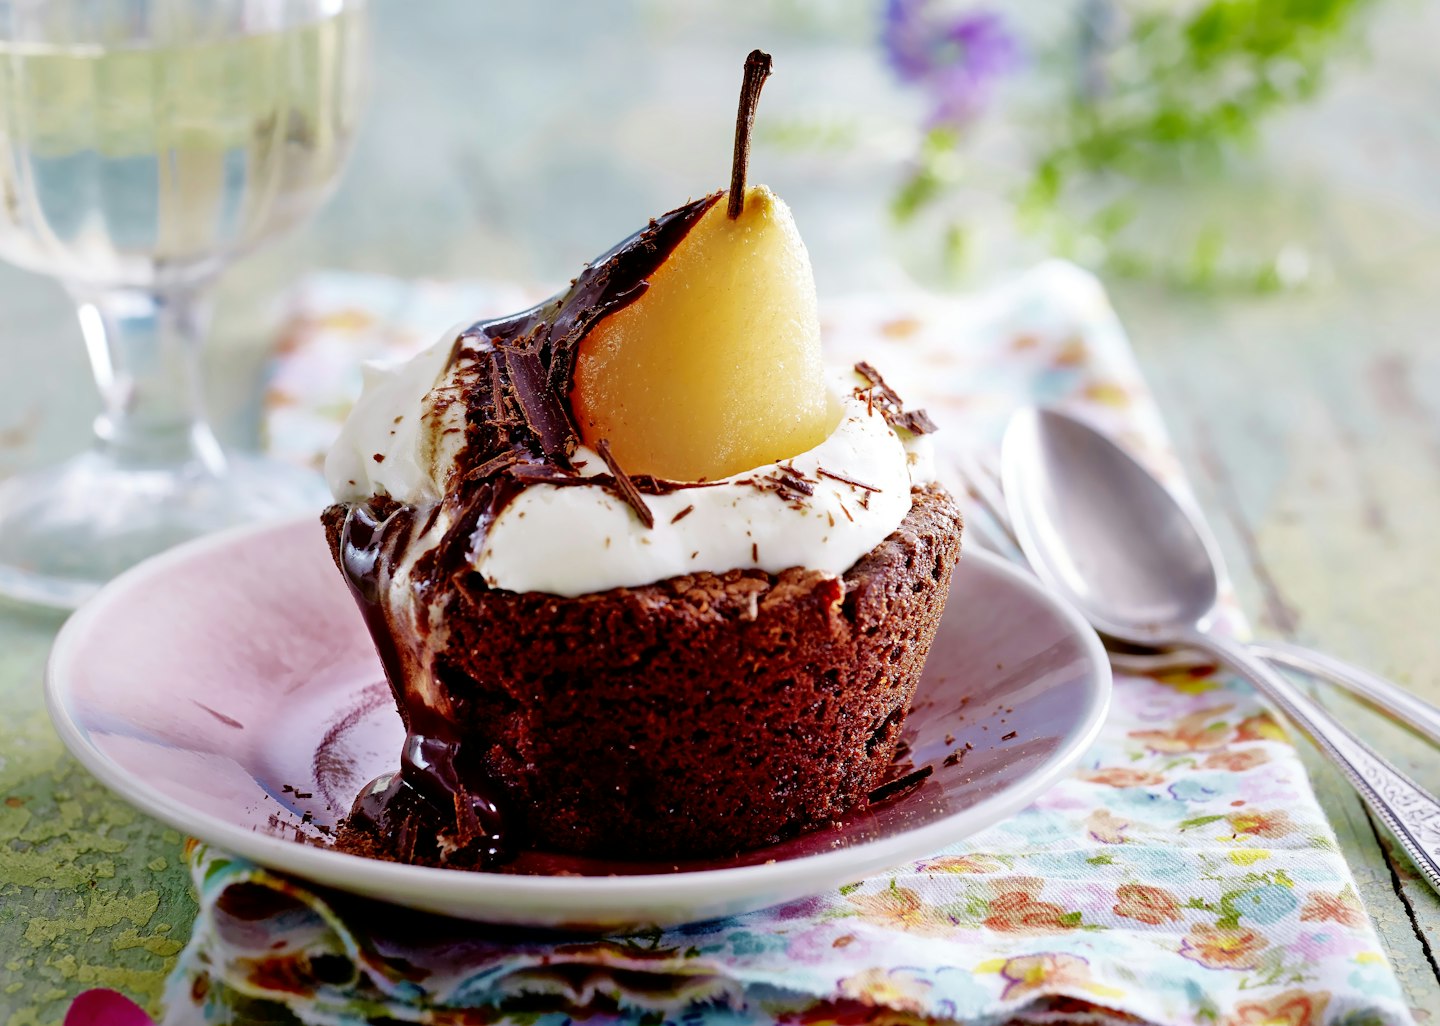 Pear and chocolate cakes